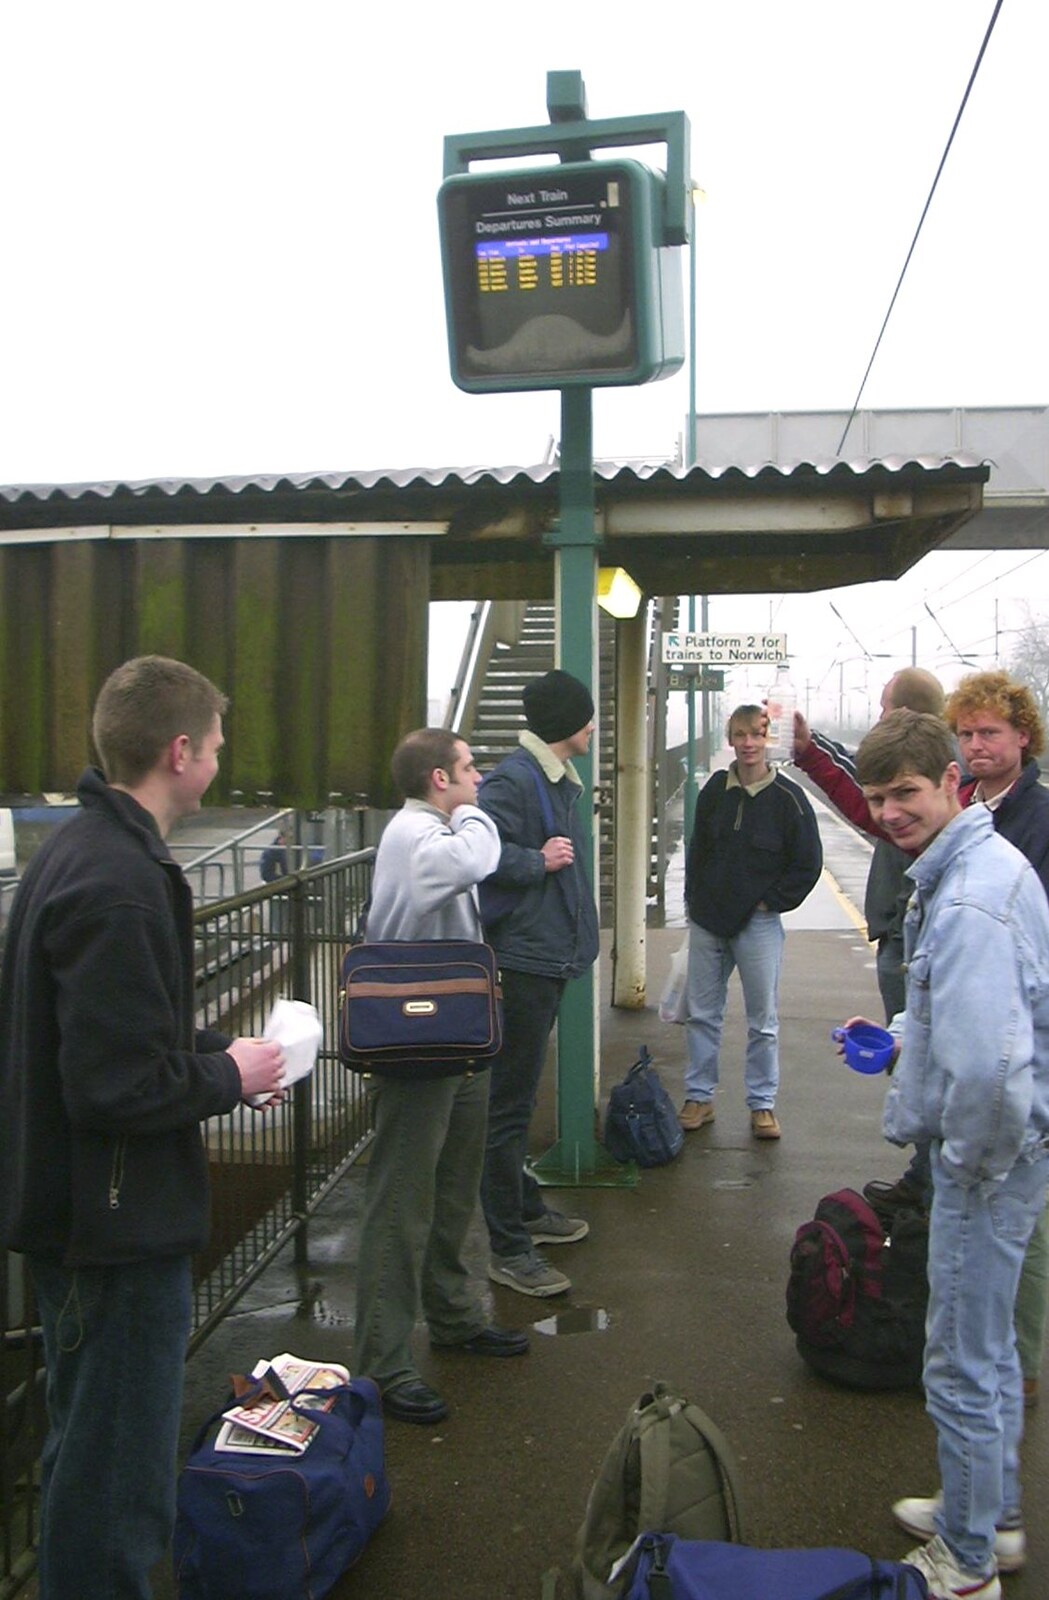 The stag-weekend gang at Diss station from Mikey-P's Stag Weekend, Amsterdam, Netherlands - 5th March 2004